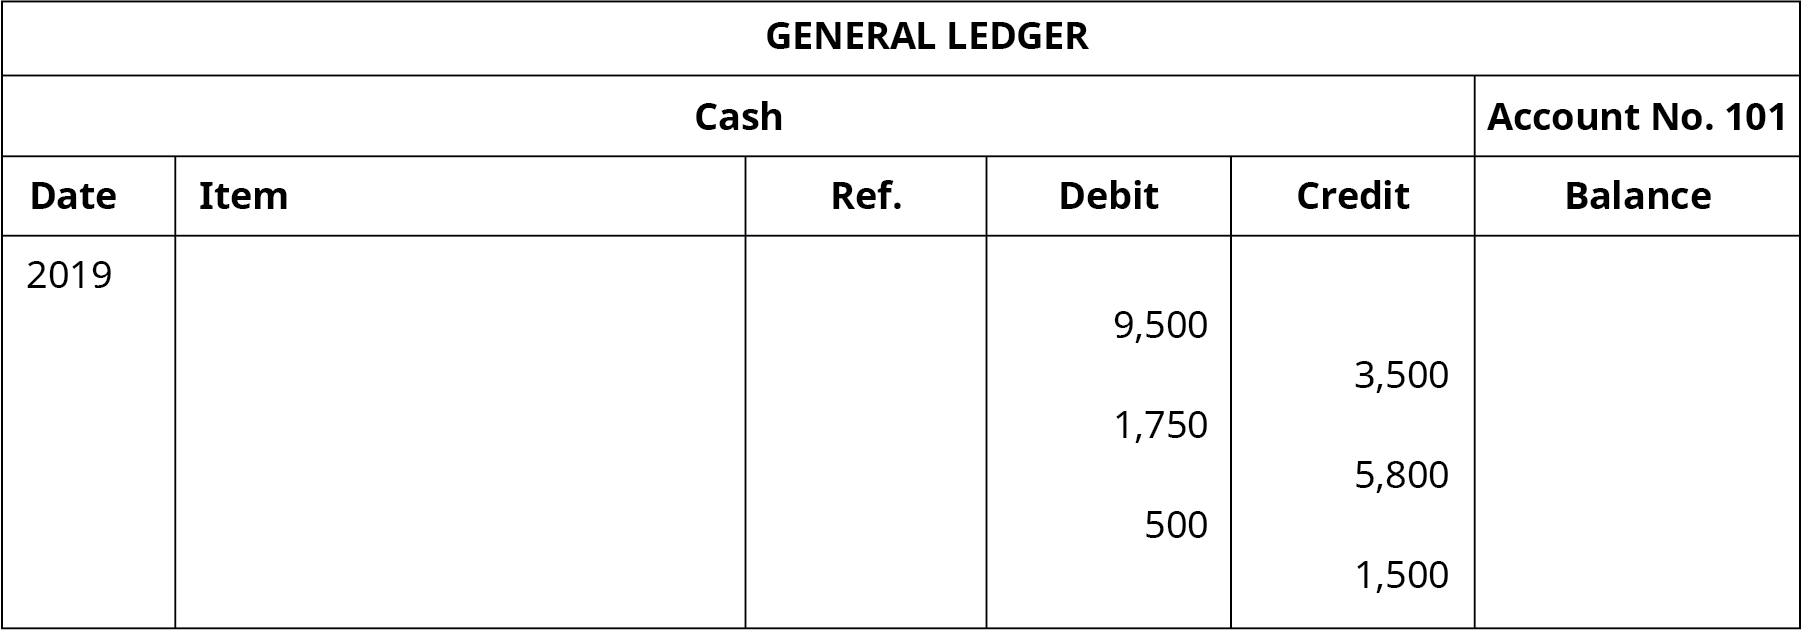 A General Ledger titled “Cash Account No. 101” with six columns. Date: 2019. Six columns labeled left to right: Date, Item, Reference, Debit, Credit, Balance. Debit: 9,500; Balance: 9,500. Credit: 3,500; Balance: 6,000. Debit: 1,750; Balance: 7,750. Credit: 5,800; Balance: 1,950. Debit: 500; Balance: 2,450. Credit: 1,500; Balance: 950.